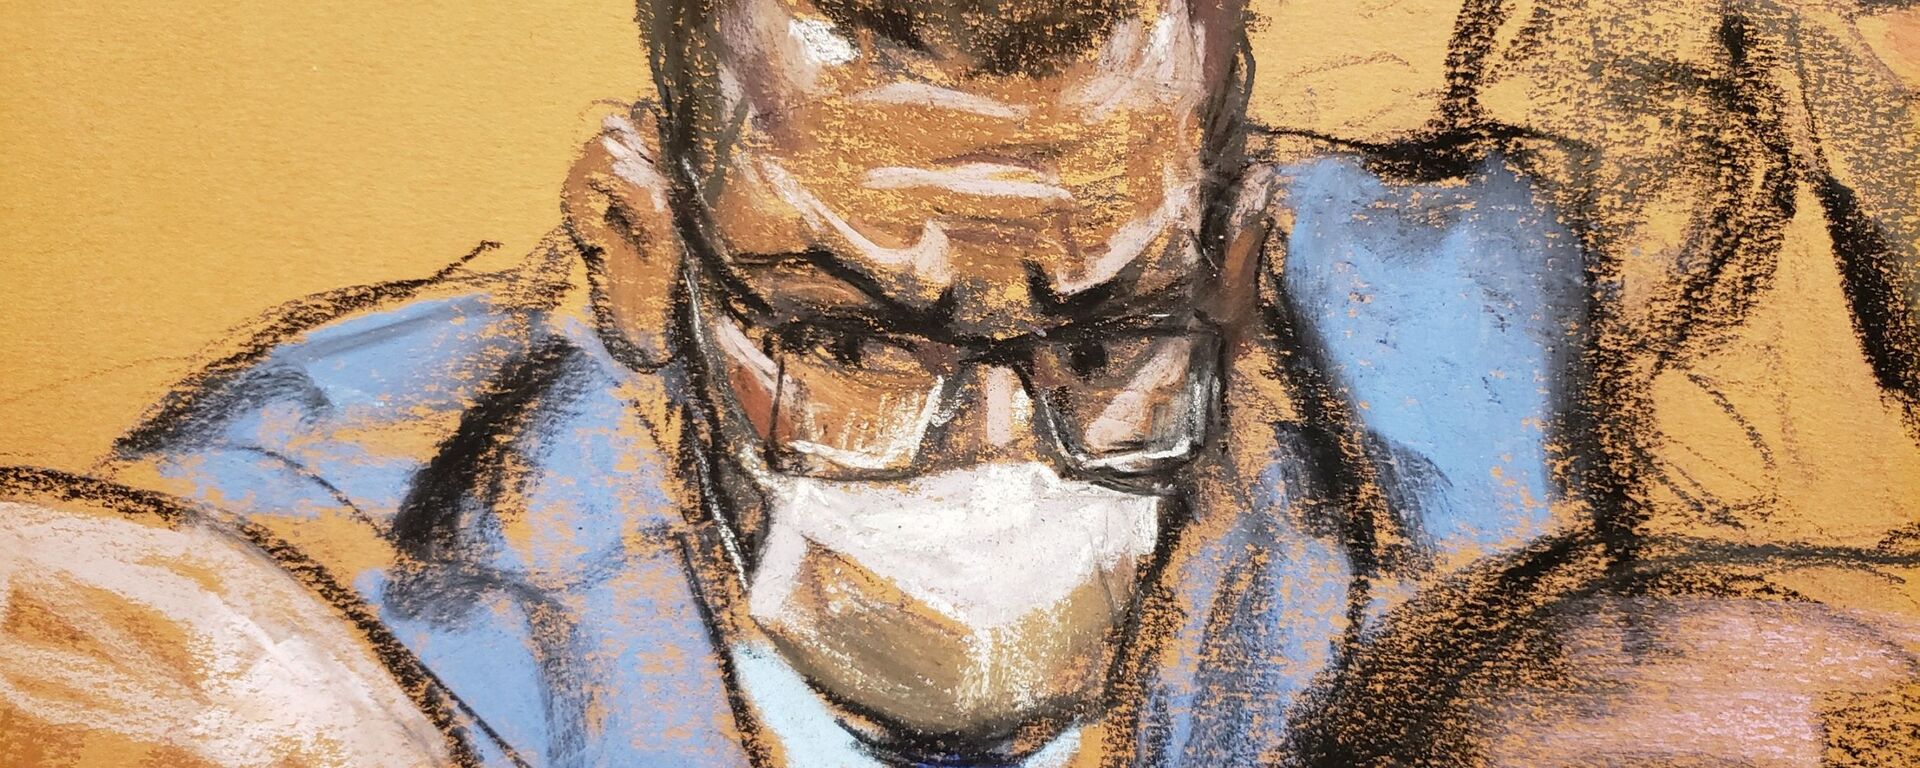 R. Kelly confers with his lawyers during his sex abuse trial at Brooklyn's Federal District Court in a courtroom sketch in New York, 2 September 2021 - Sputnik International, 1920, 04.09.2021